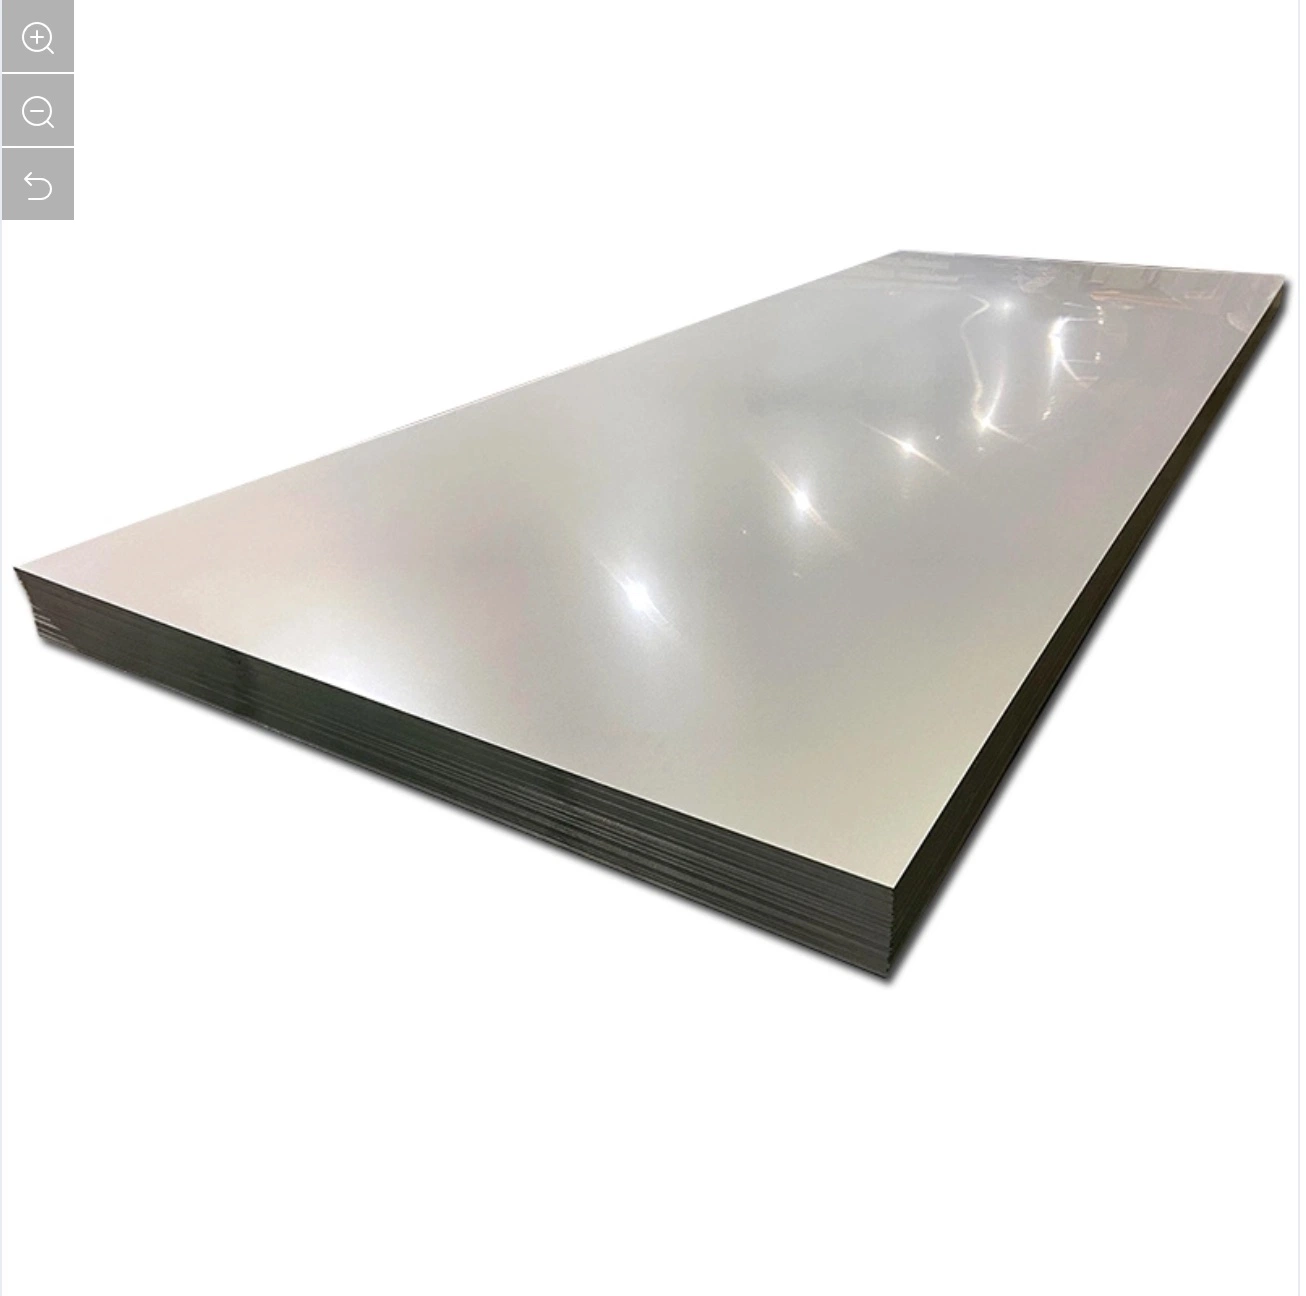 Mainly Product 8K Mirror Golden Rose 2b Ba No. 4 Hl No. 1 Ss 304 304L 316 316L 309S 310S 410 420 430 2205 2507 904L Cold Hot Rolled Stainless Steel Sheet